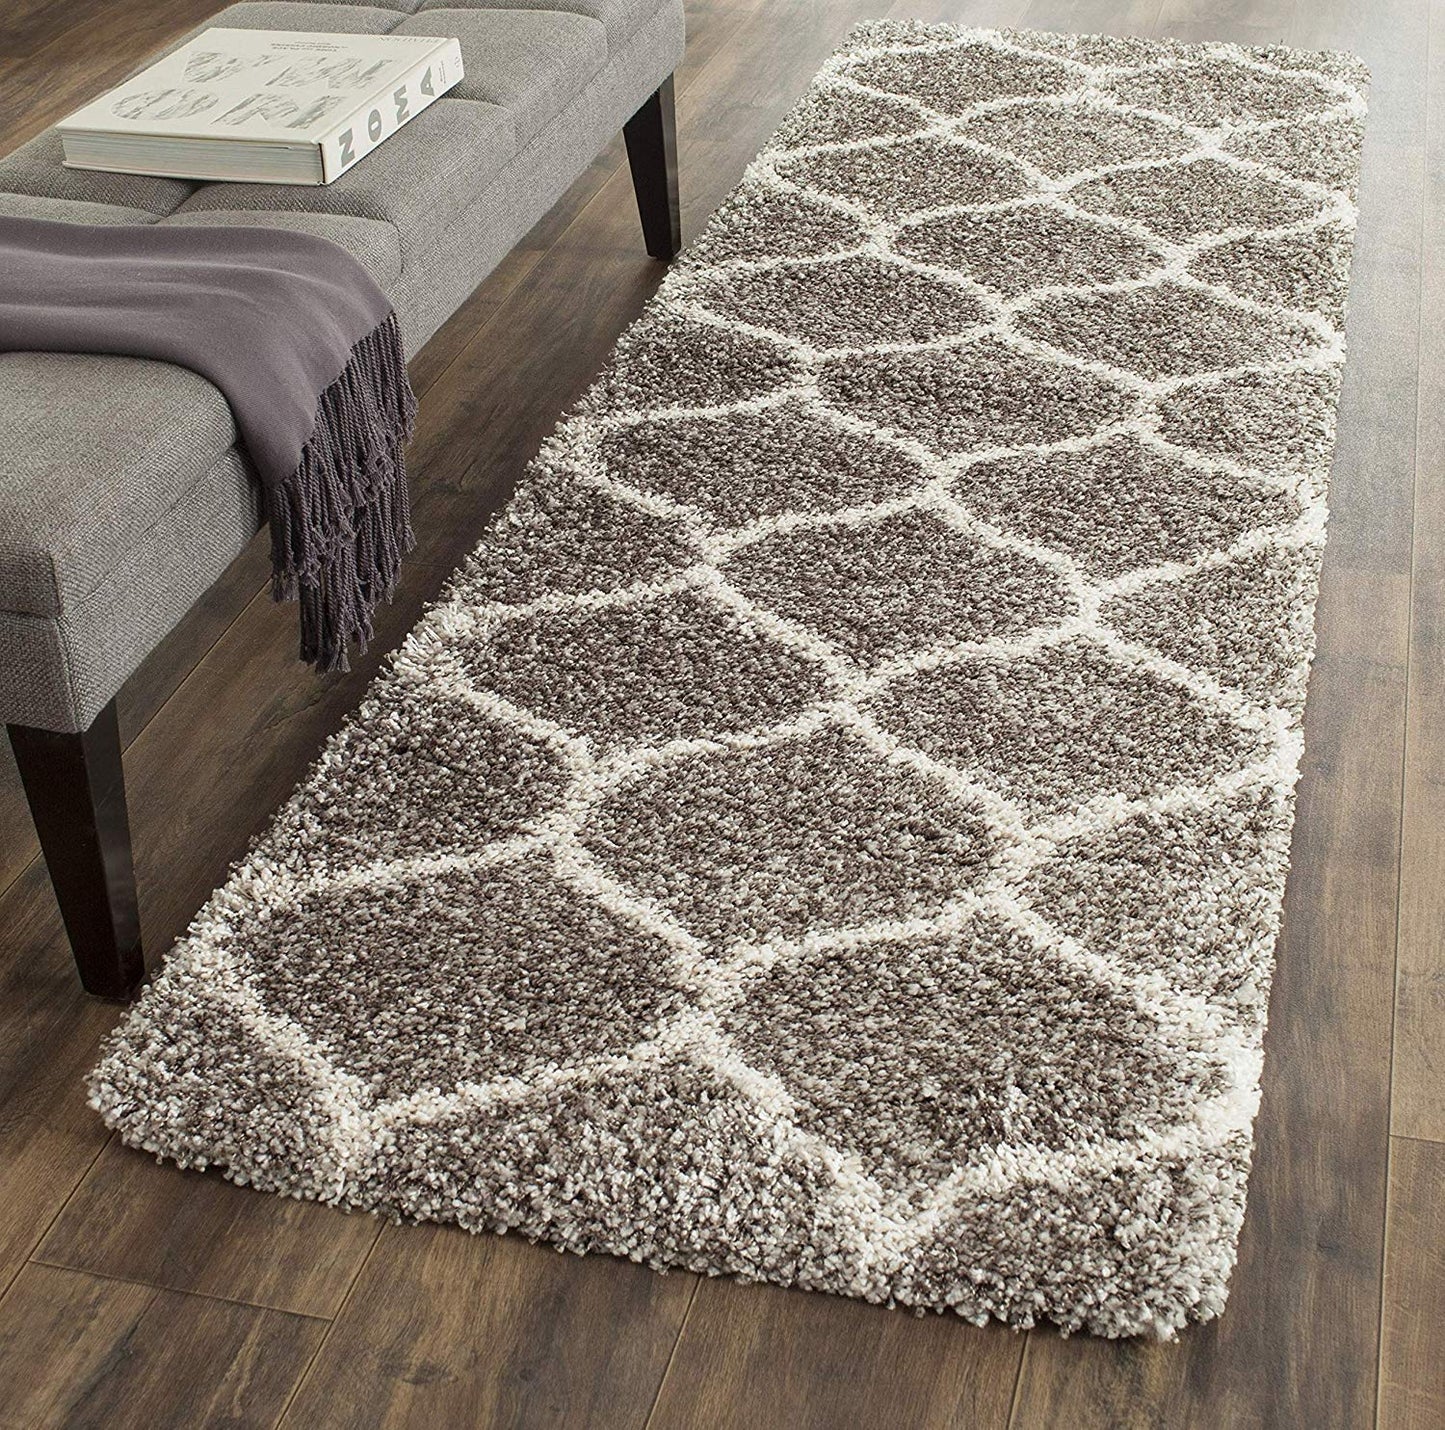 Kashyapa Rugs Collection - Moroccan Style Microfiber Carpet Runner In Beige & White| Soft, Non-Slip, Easy to Clean.